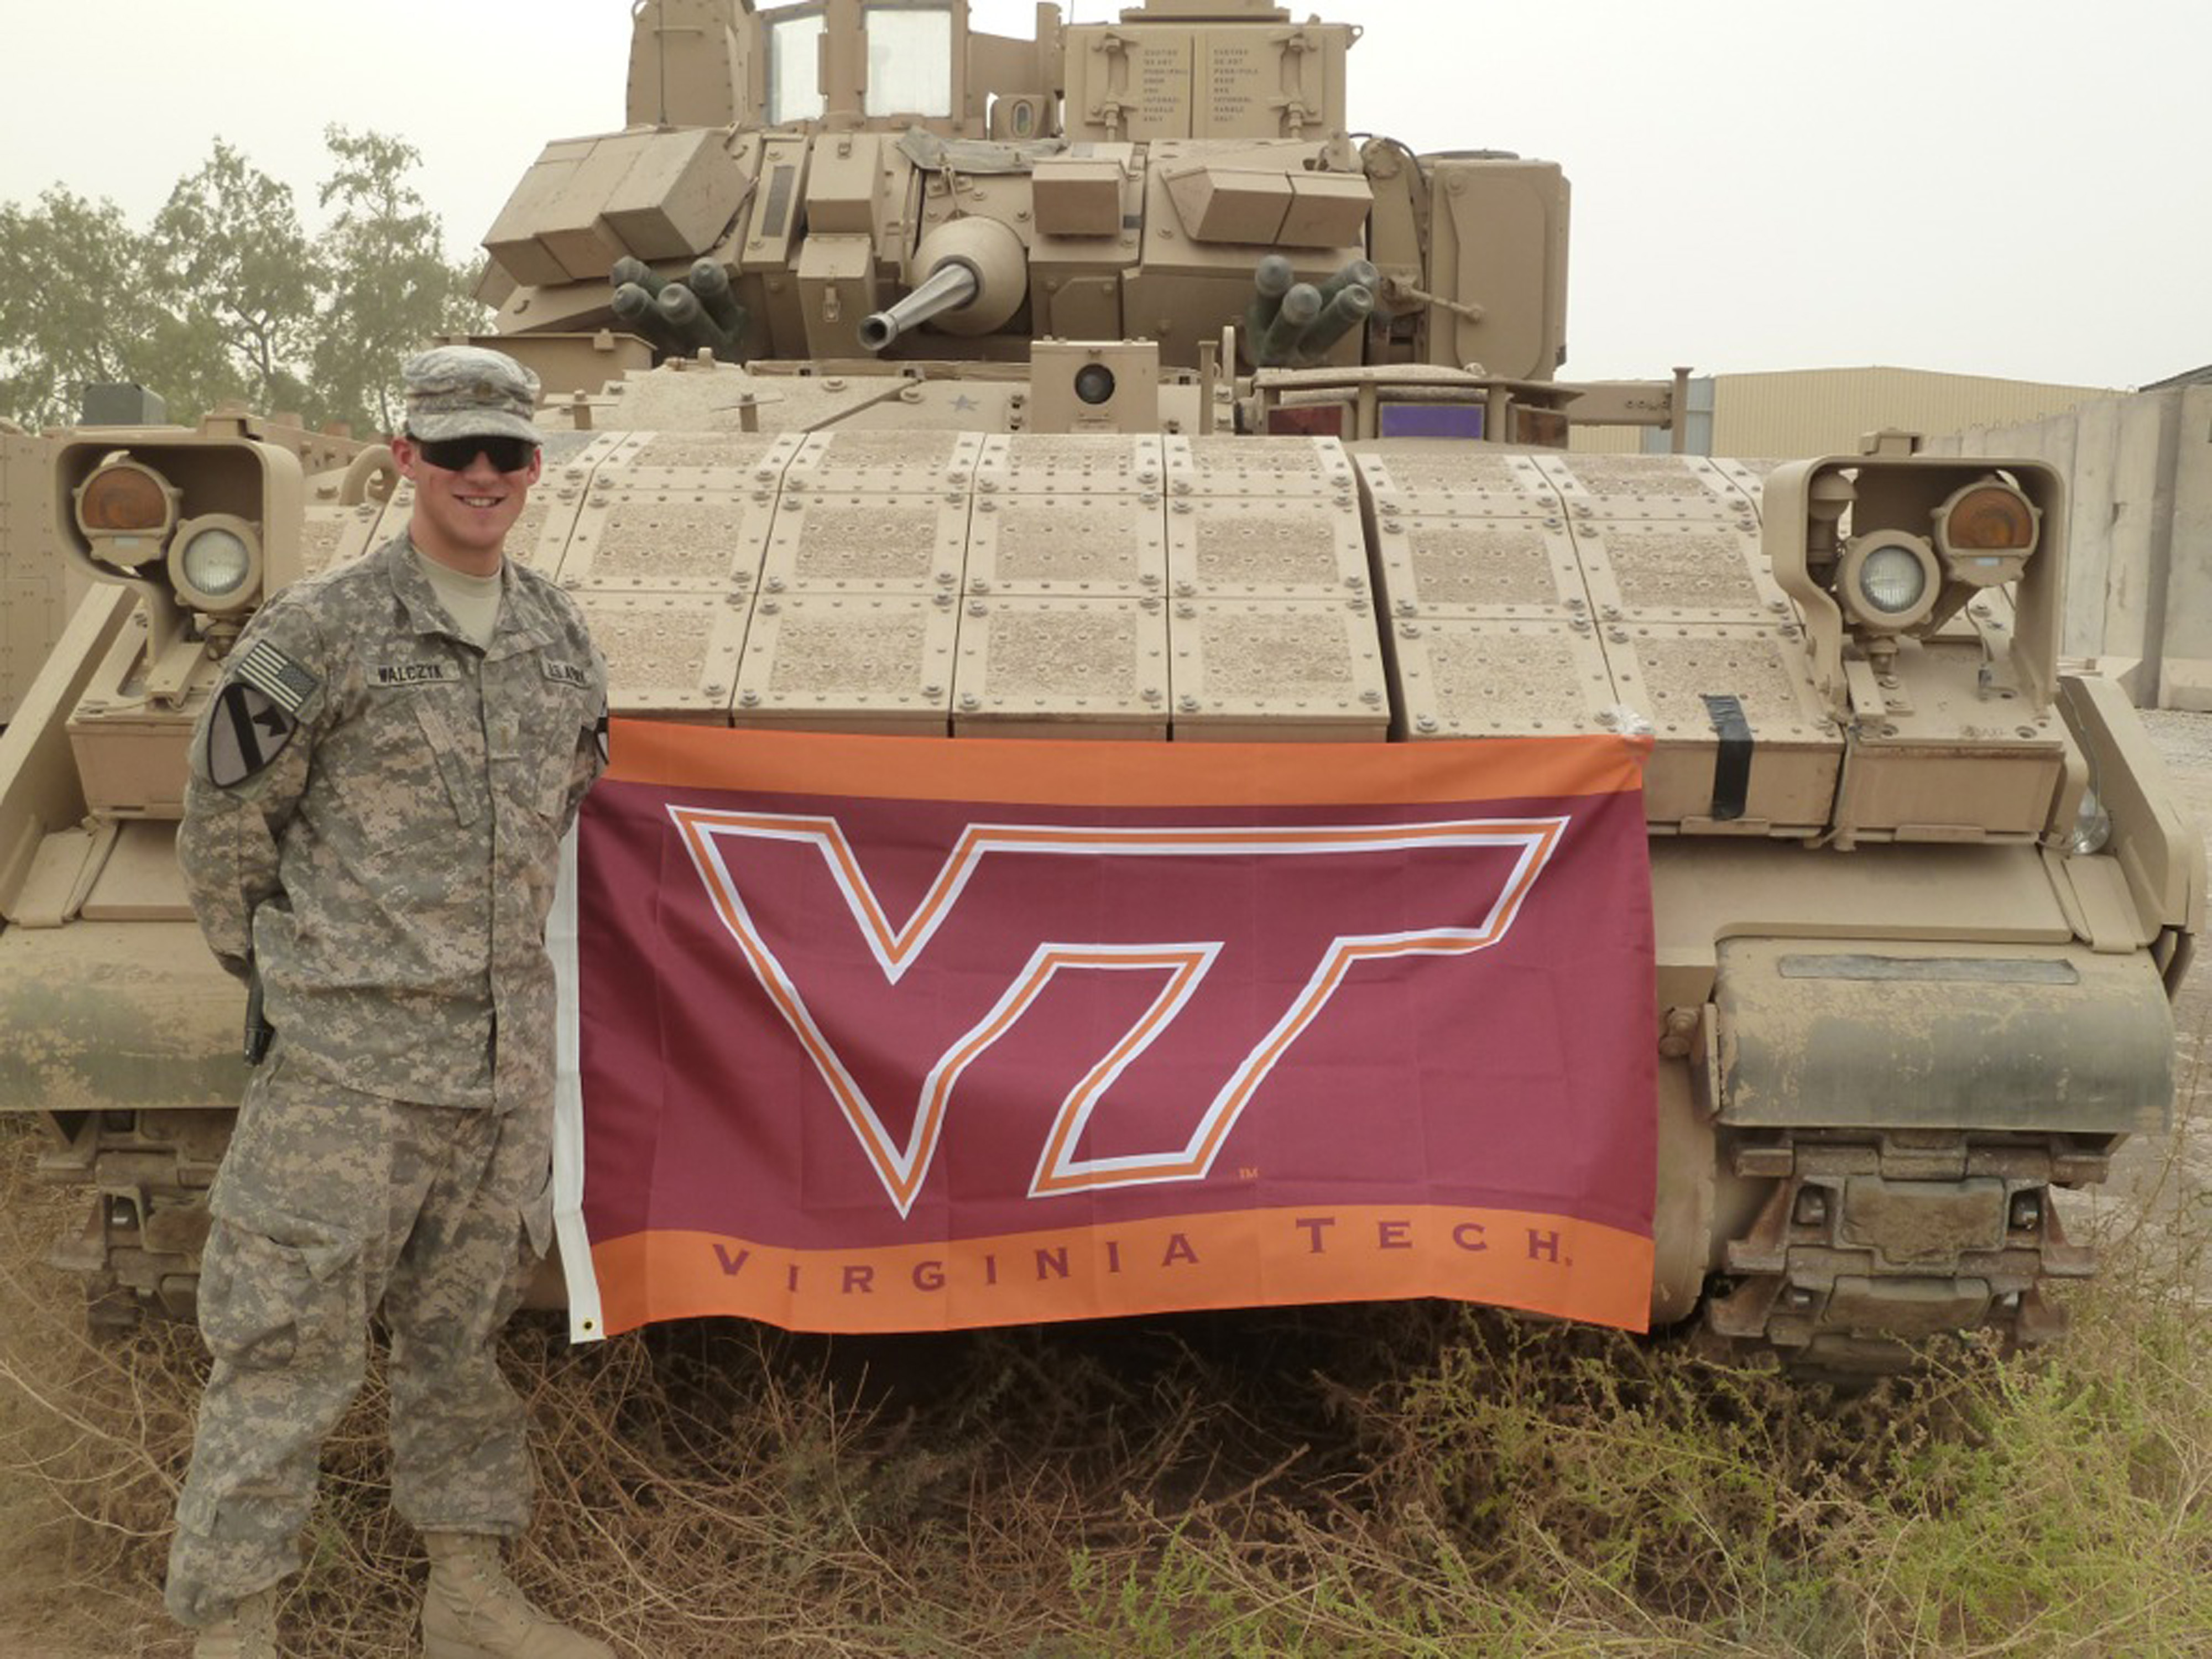 2nd Lt. Mark Walczyk, U.S. Army, Virginia Tech Corps of Cadets Class of 2010, the Hokie Hero for the Appalachian State game